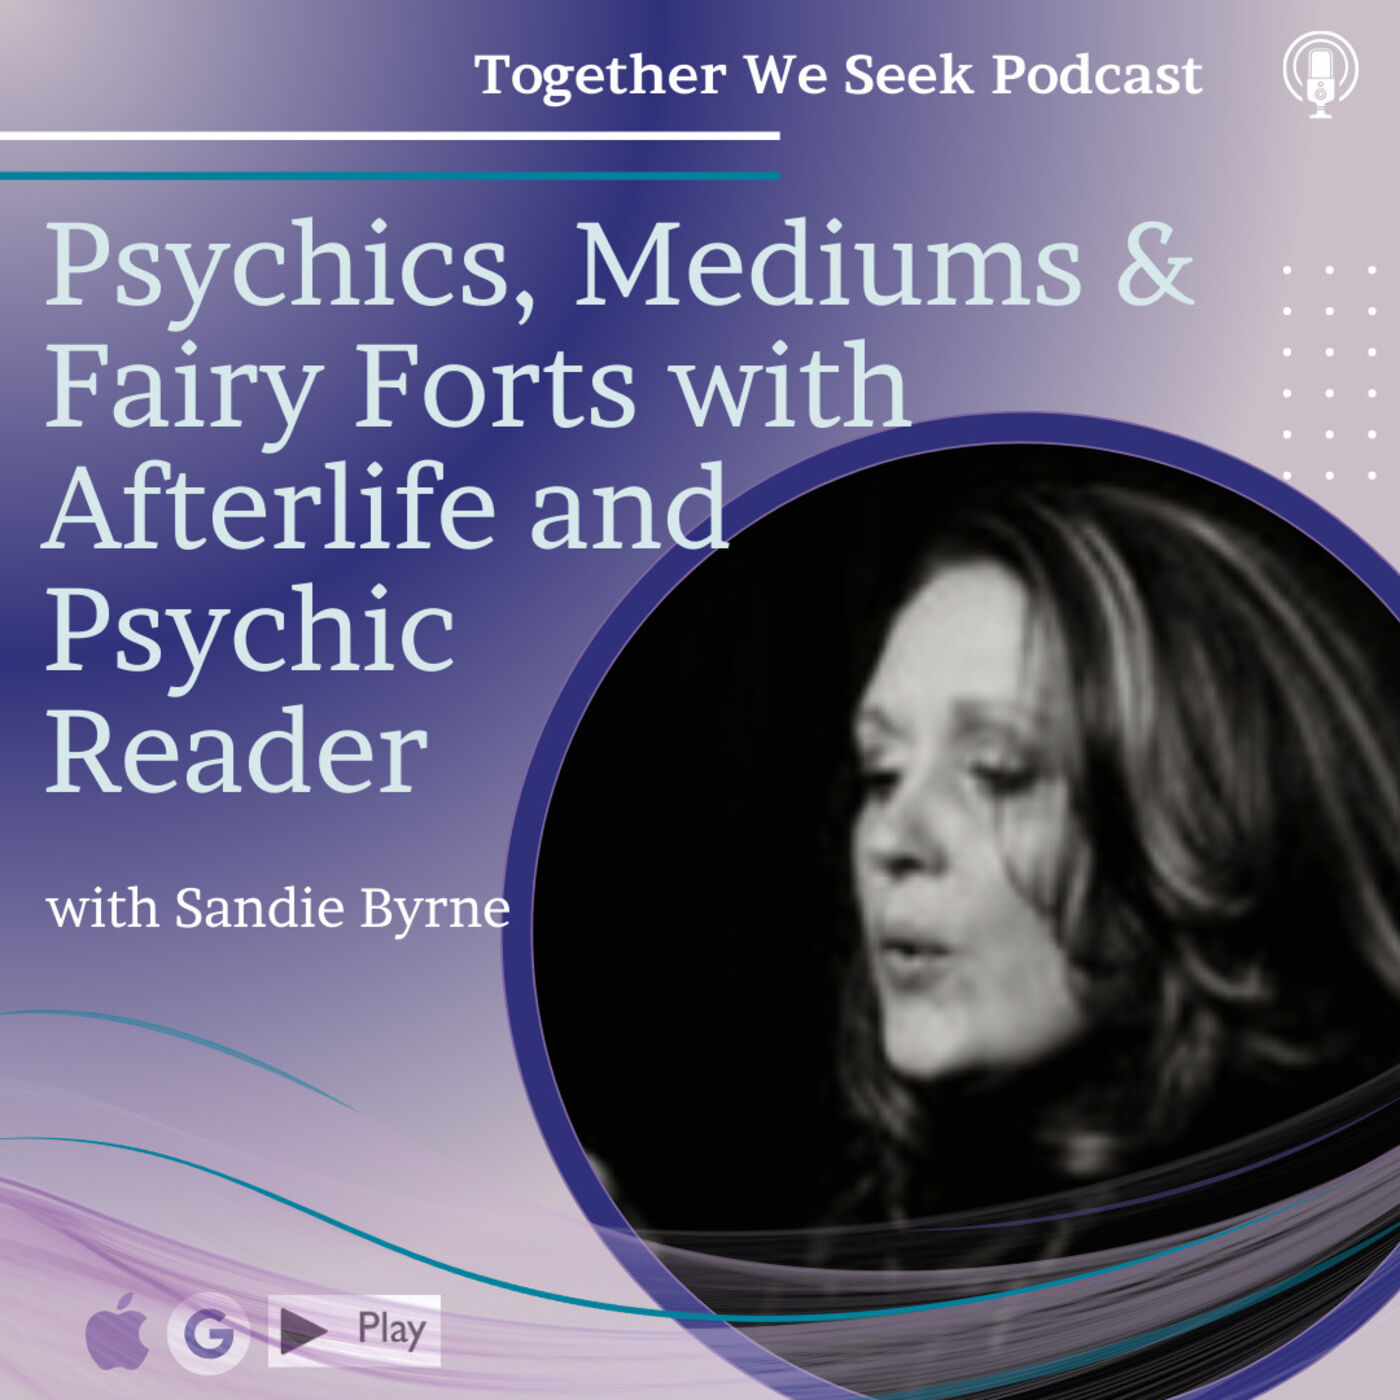 Psychics, Mediums & Fairy Forts with Afterlife and Psychic Reader Sandie Byrne